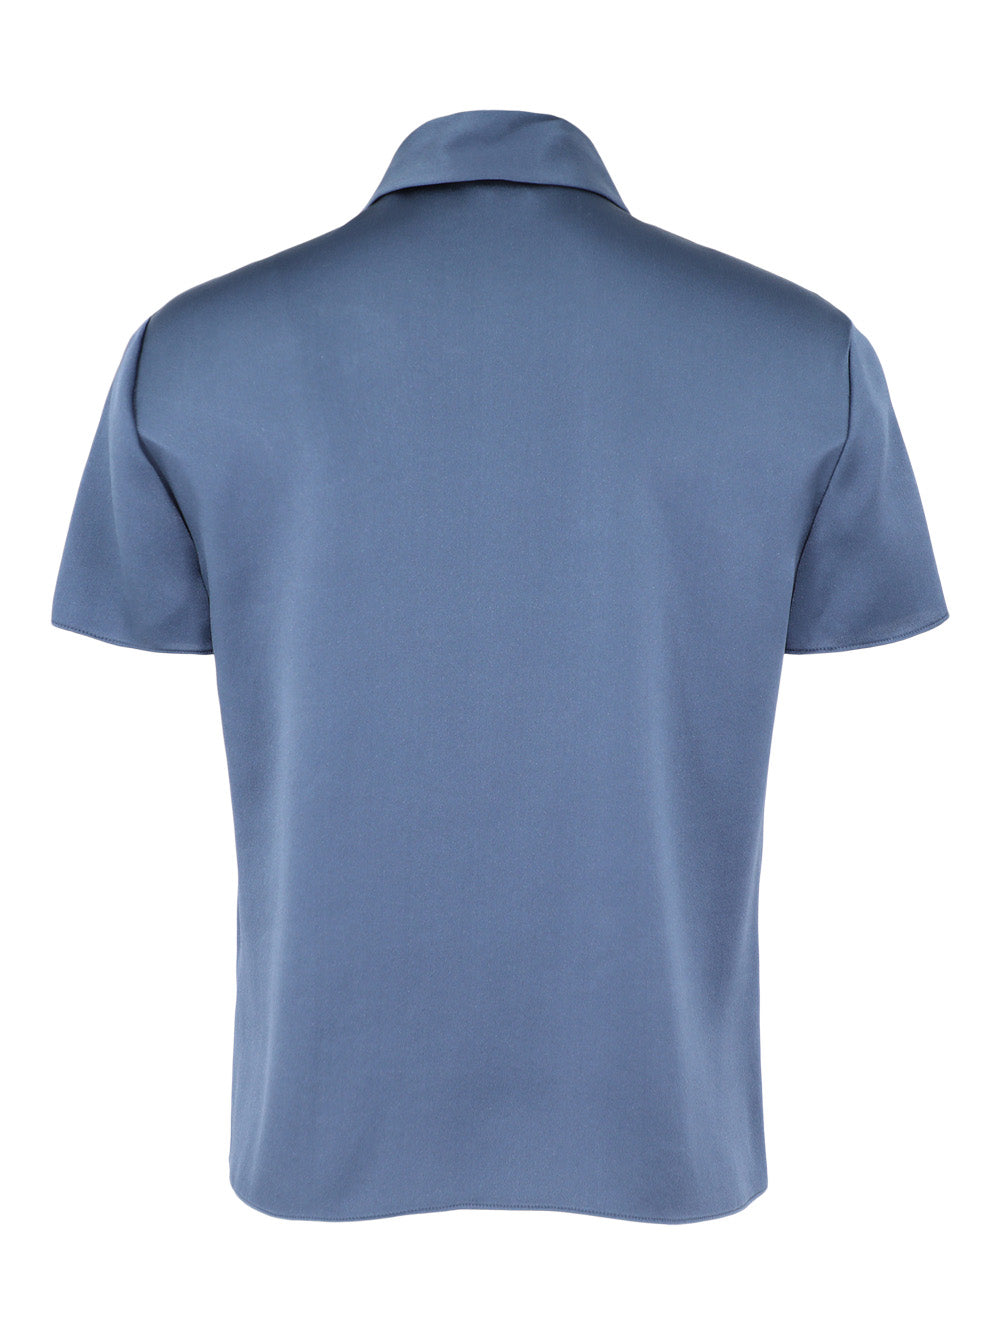 Vince Short Sleeve Polo in Riverbed